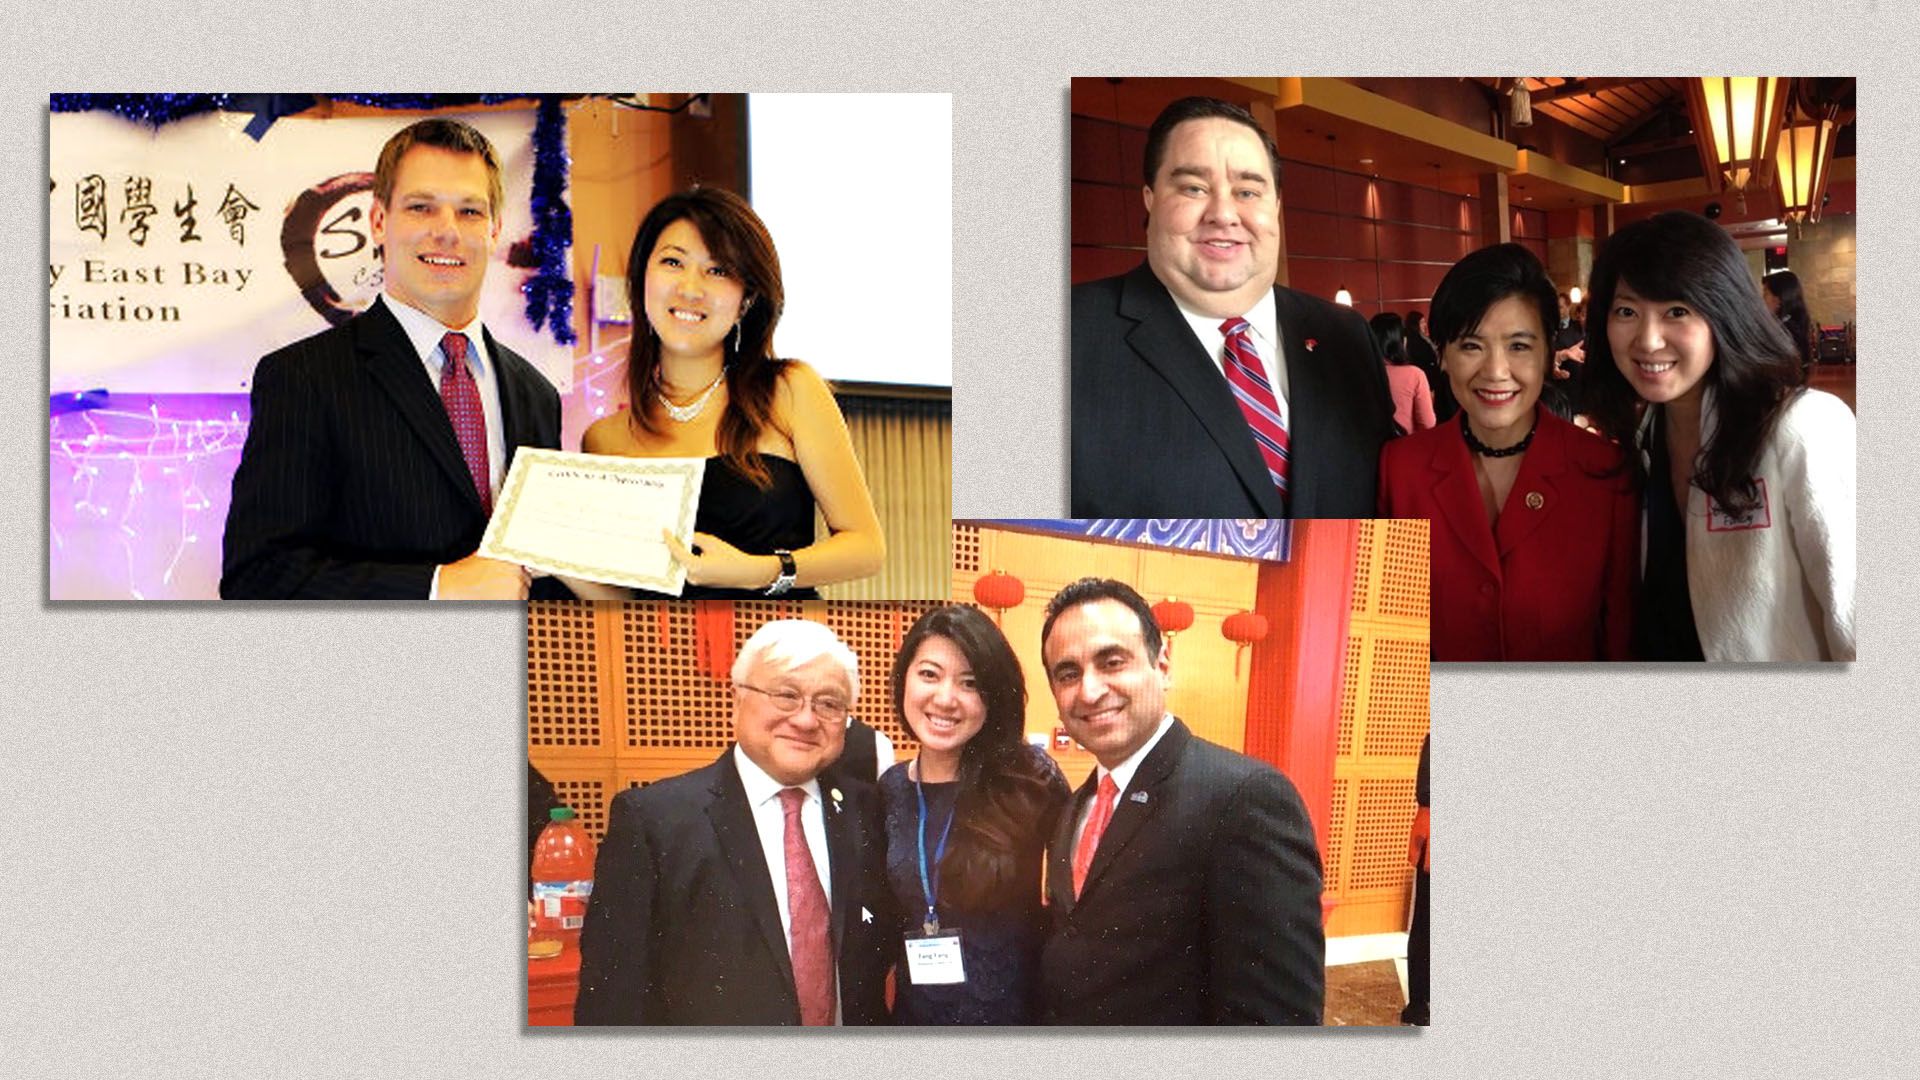 Montage of three images of Fang with Bay Area politicians